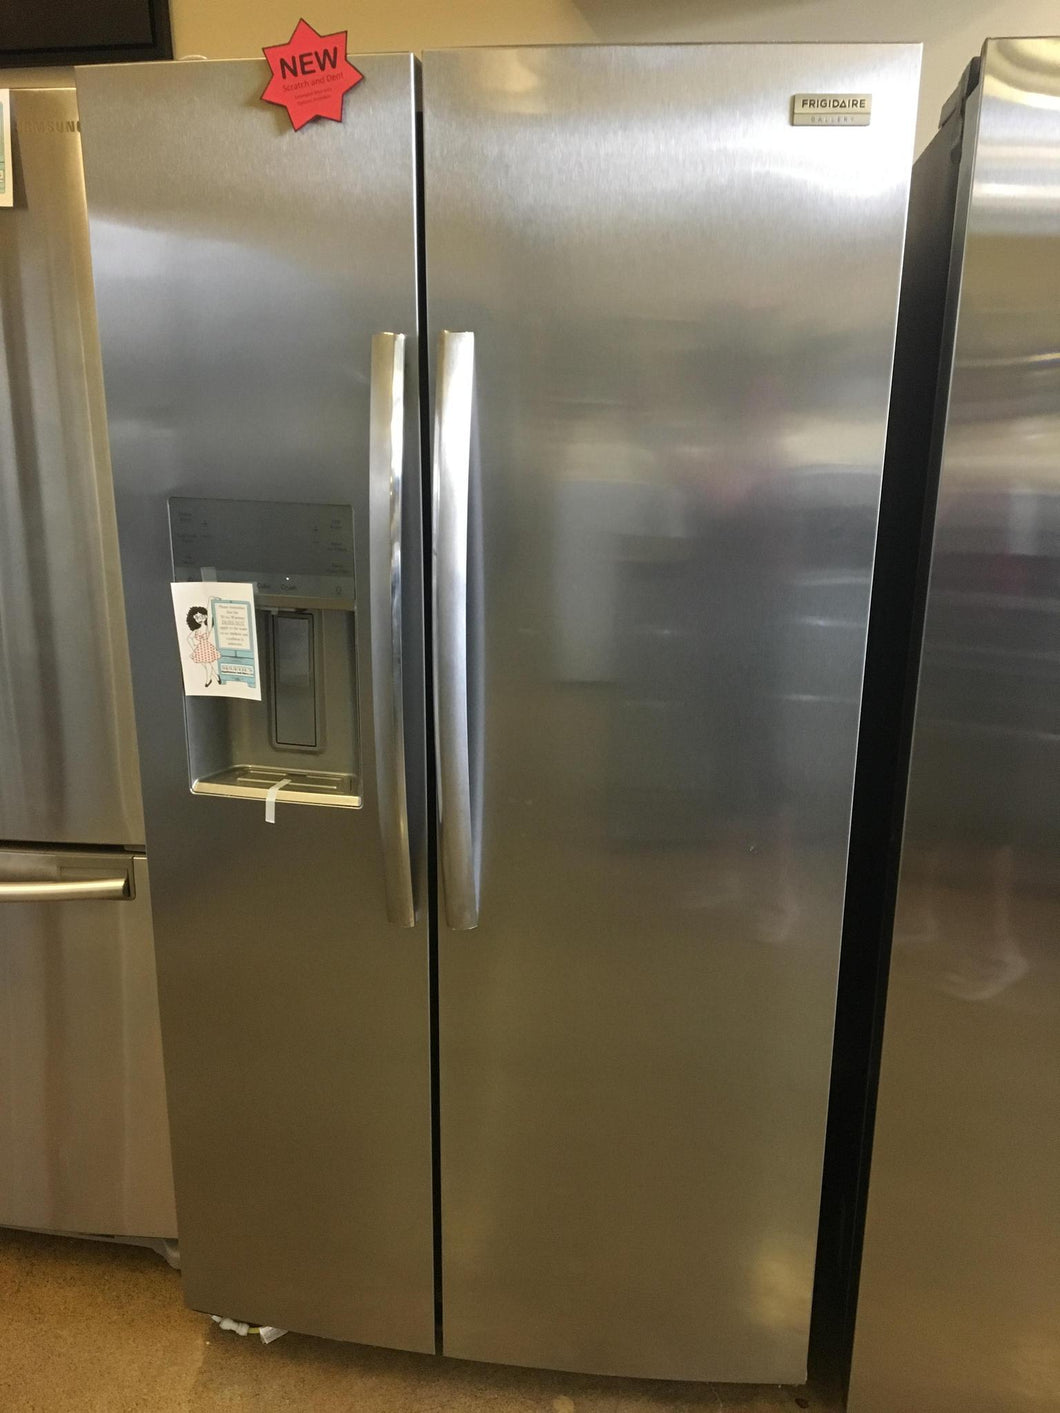 Frigidaire Stainless Side by Side Refrigerator - 9449